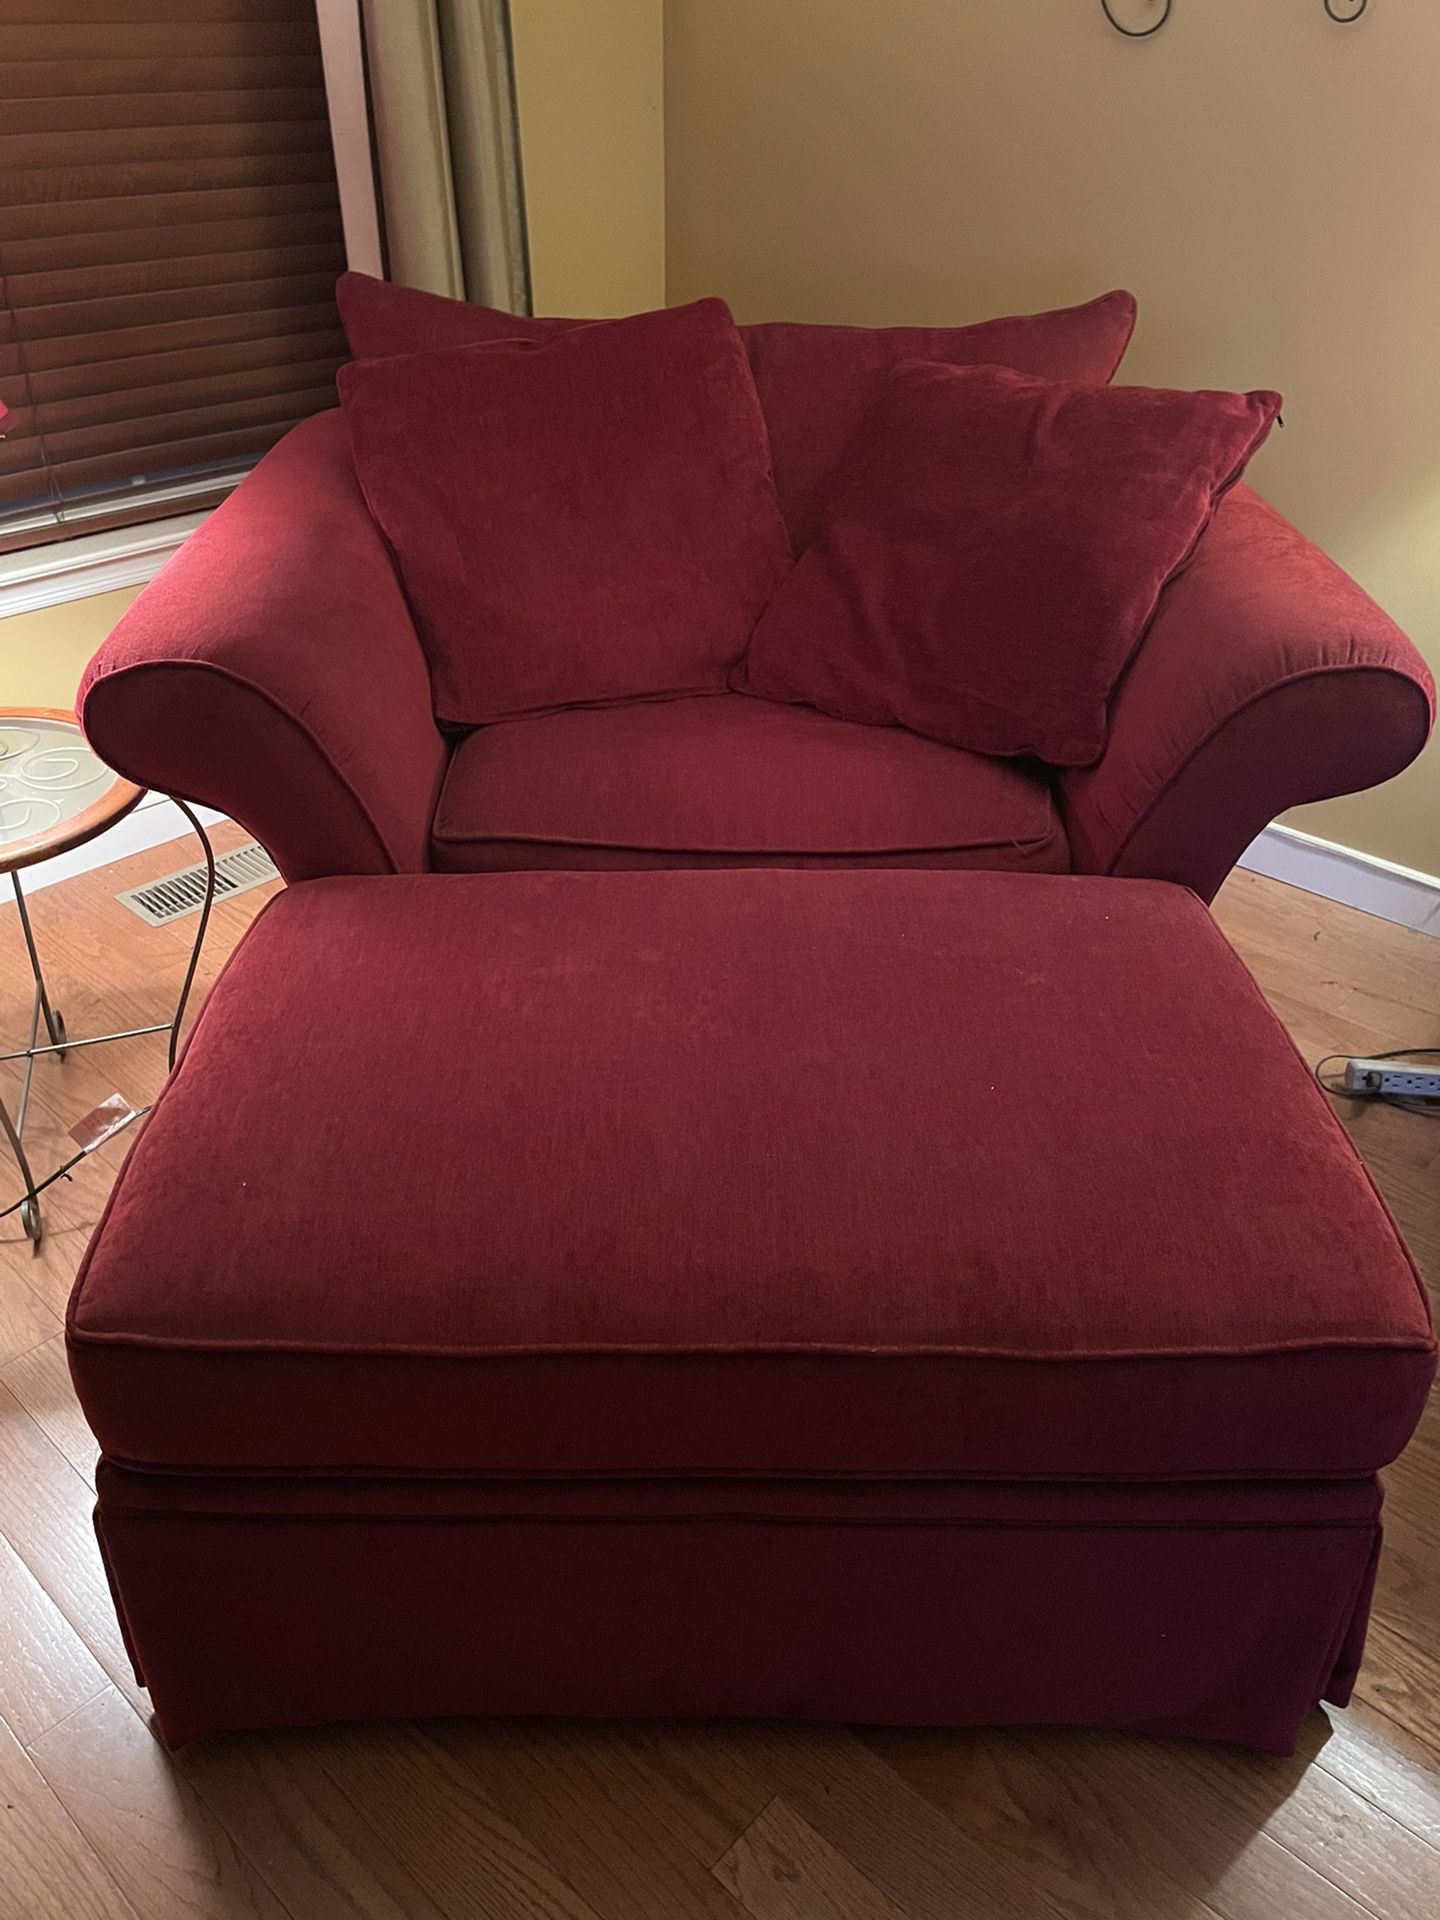 2 Person Loveseat With Rolling Ottoman (Price negotiable)